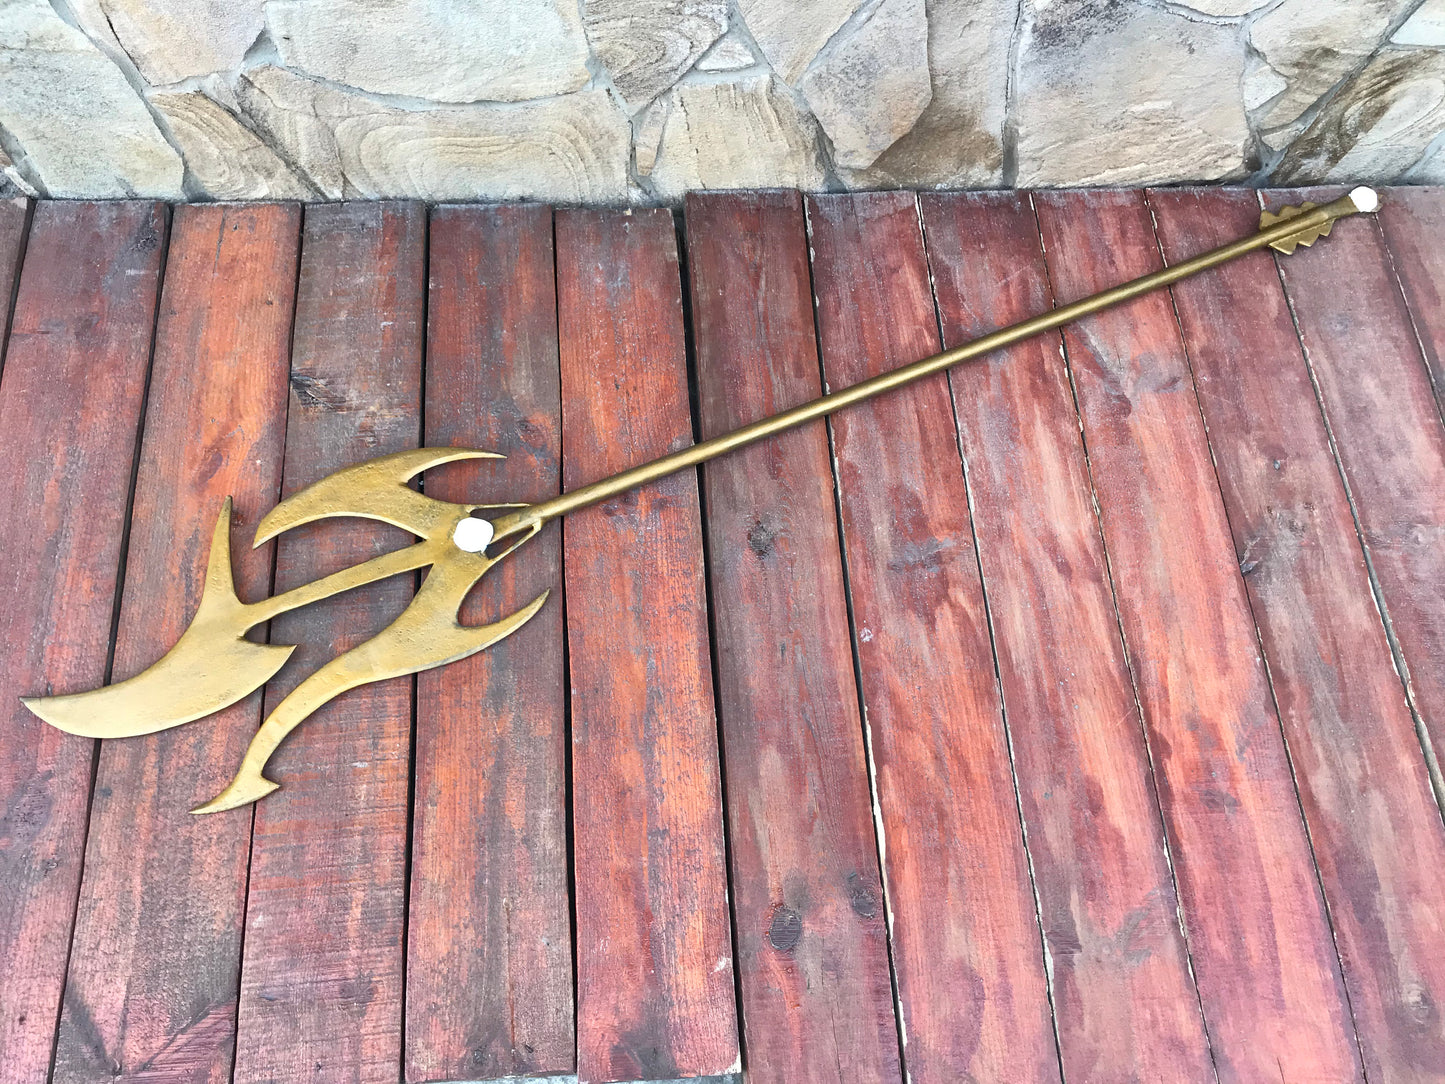 Mera trident, comics, cosplay trident, trident, cosplay weapon, cosplay armor, Aquaman, ocean gift, sea gift, iron gift, 6th anniversary,axe